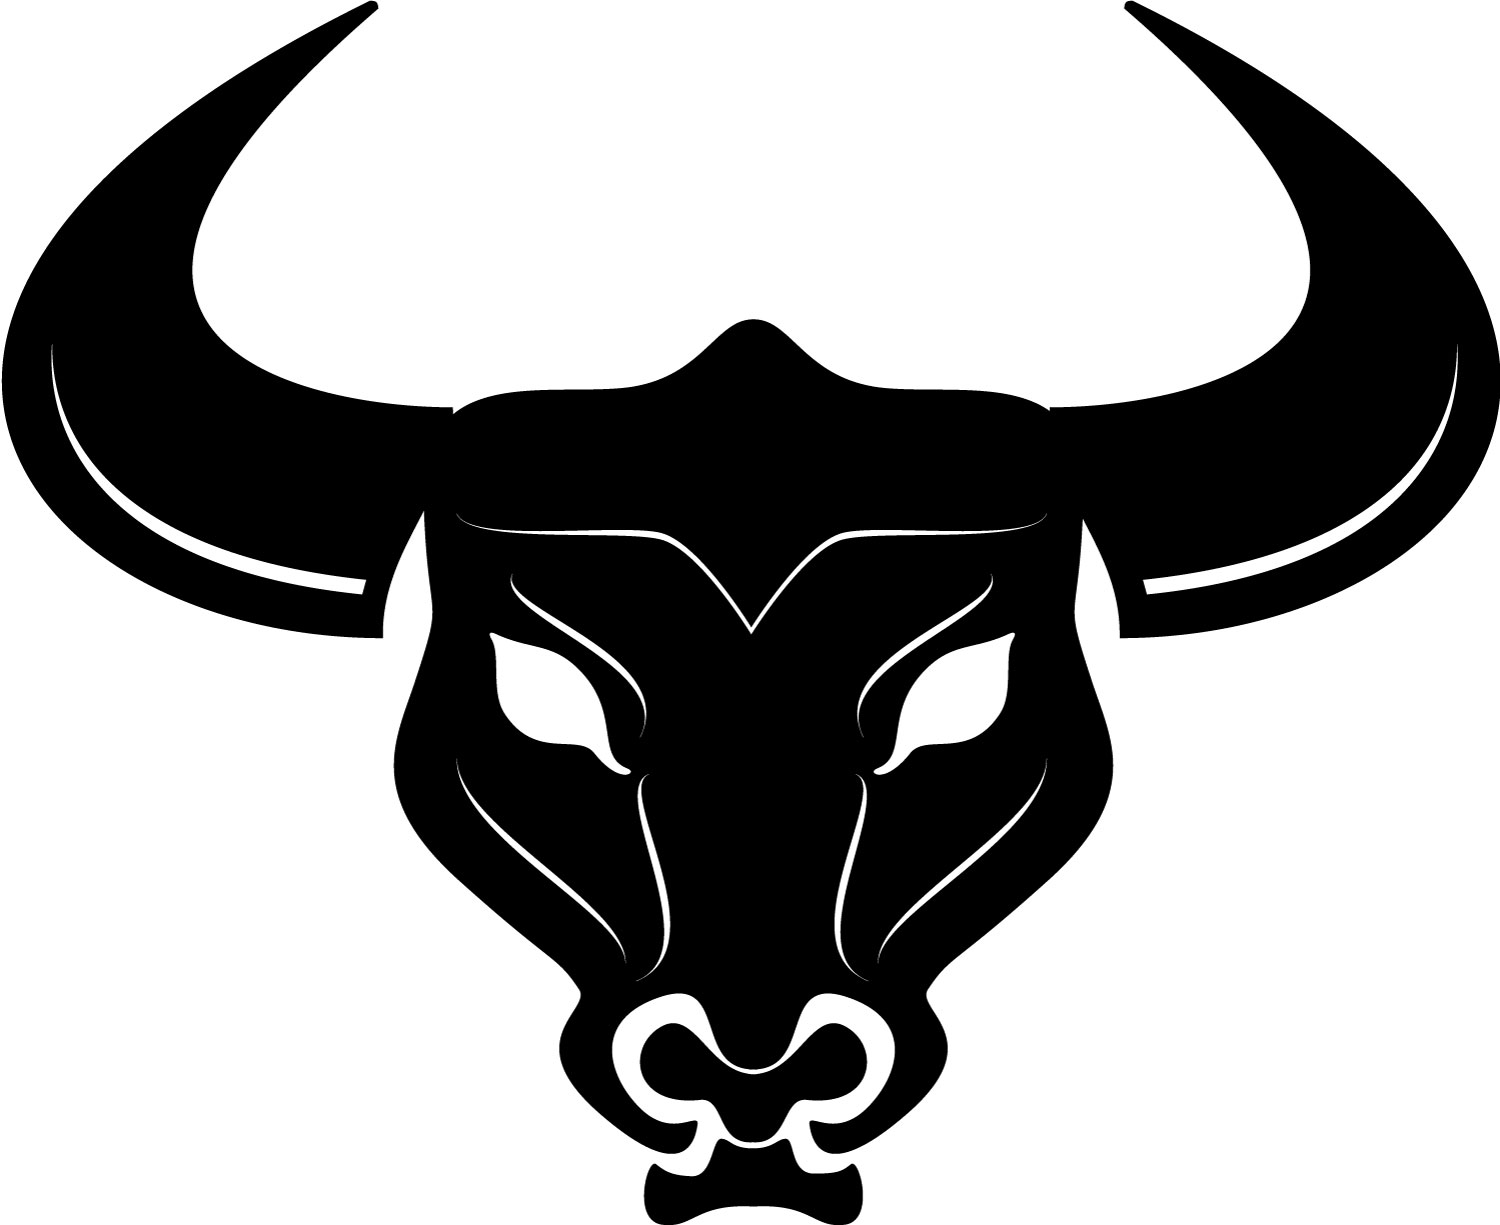 bull head tattoos | Basketball Team and Players Image Source ...